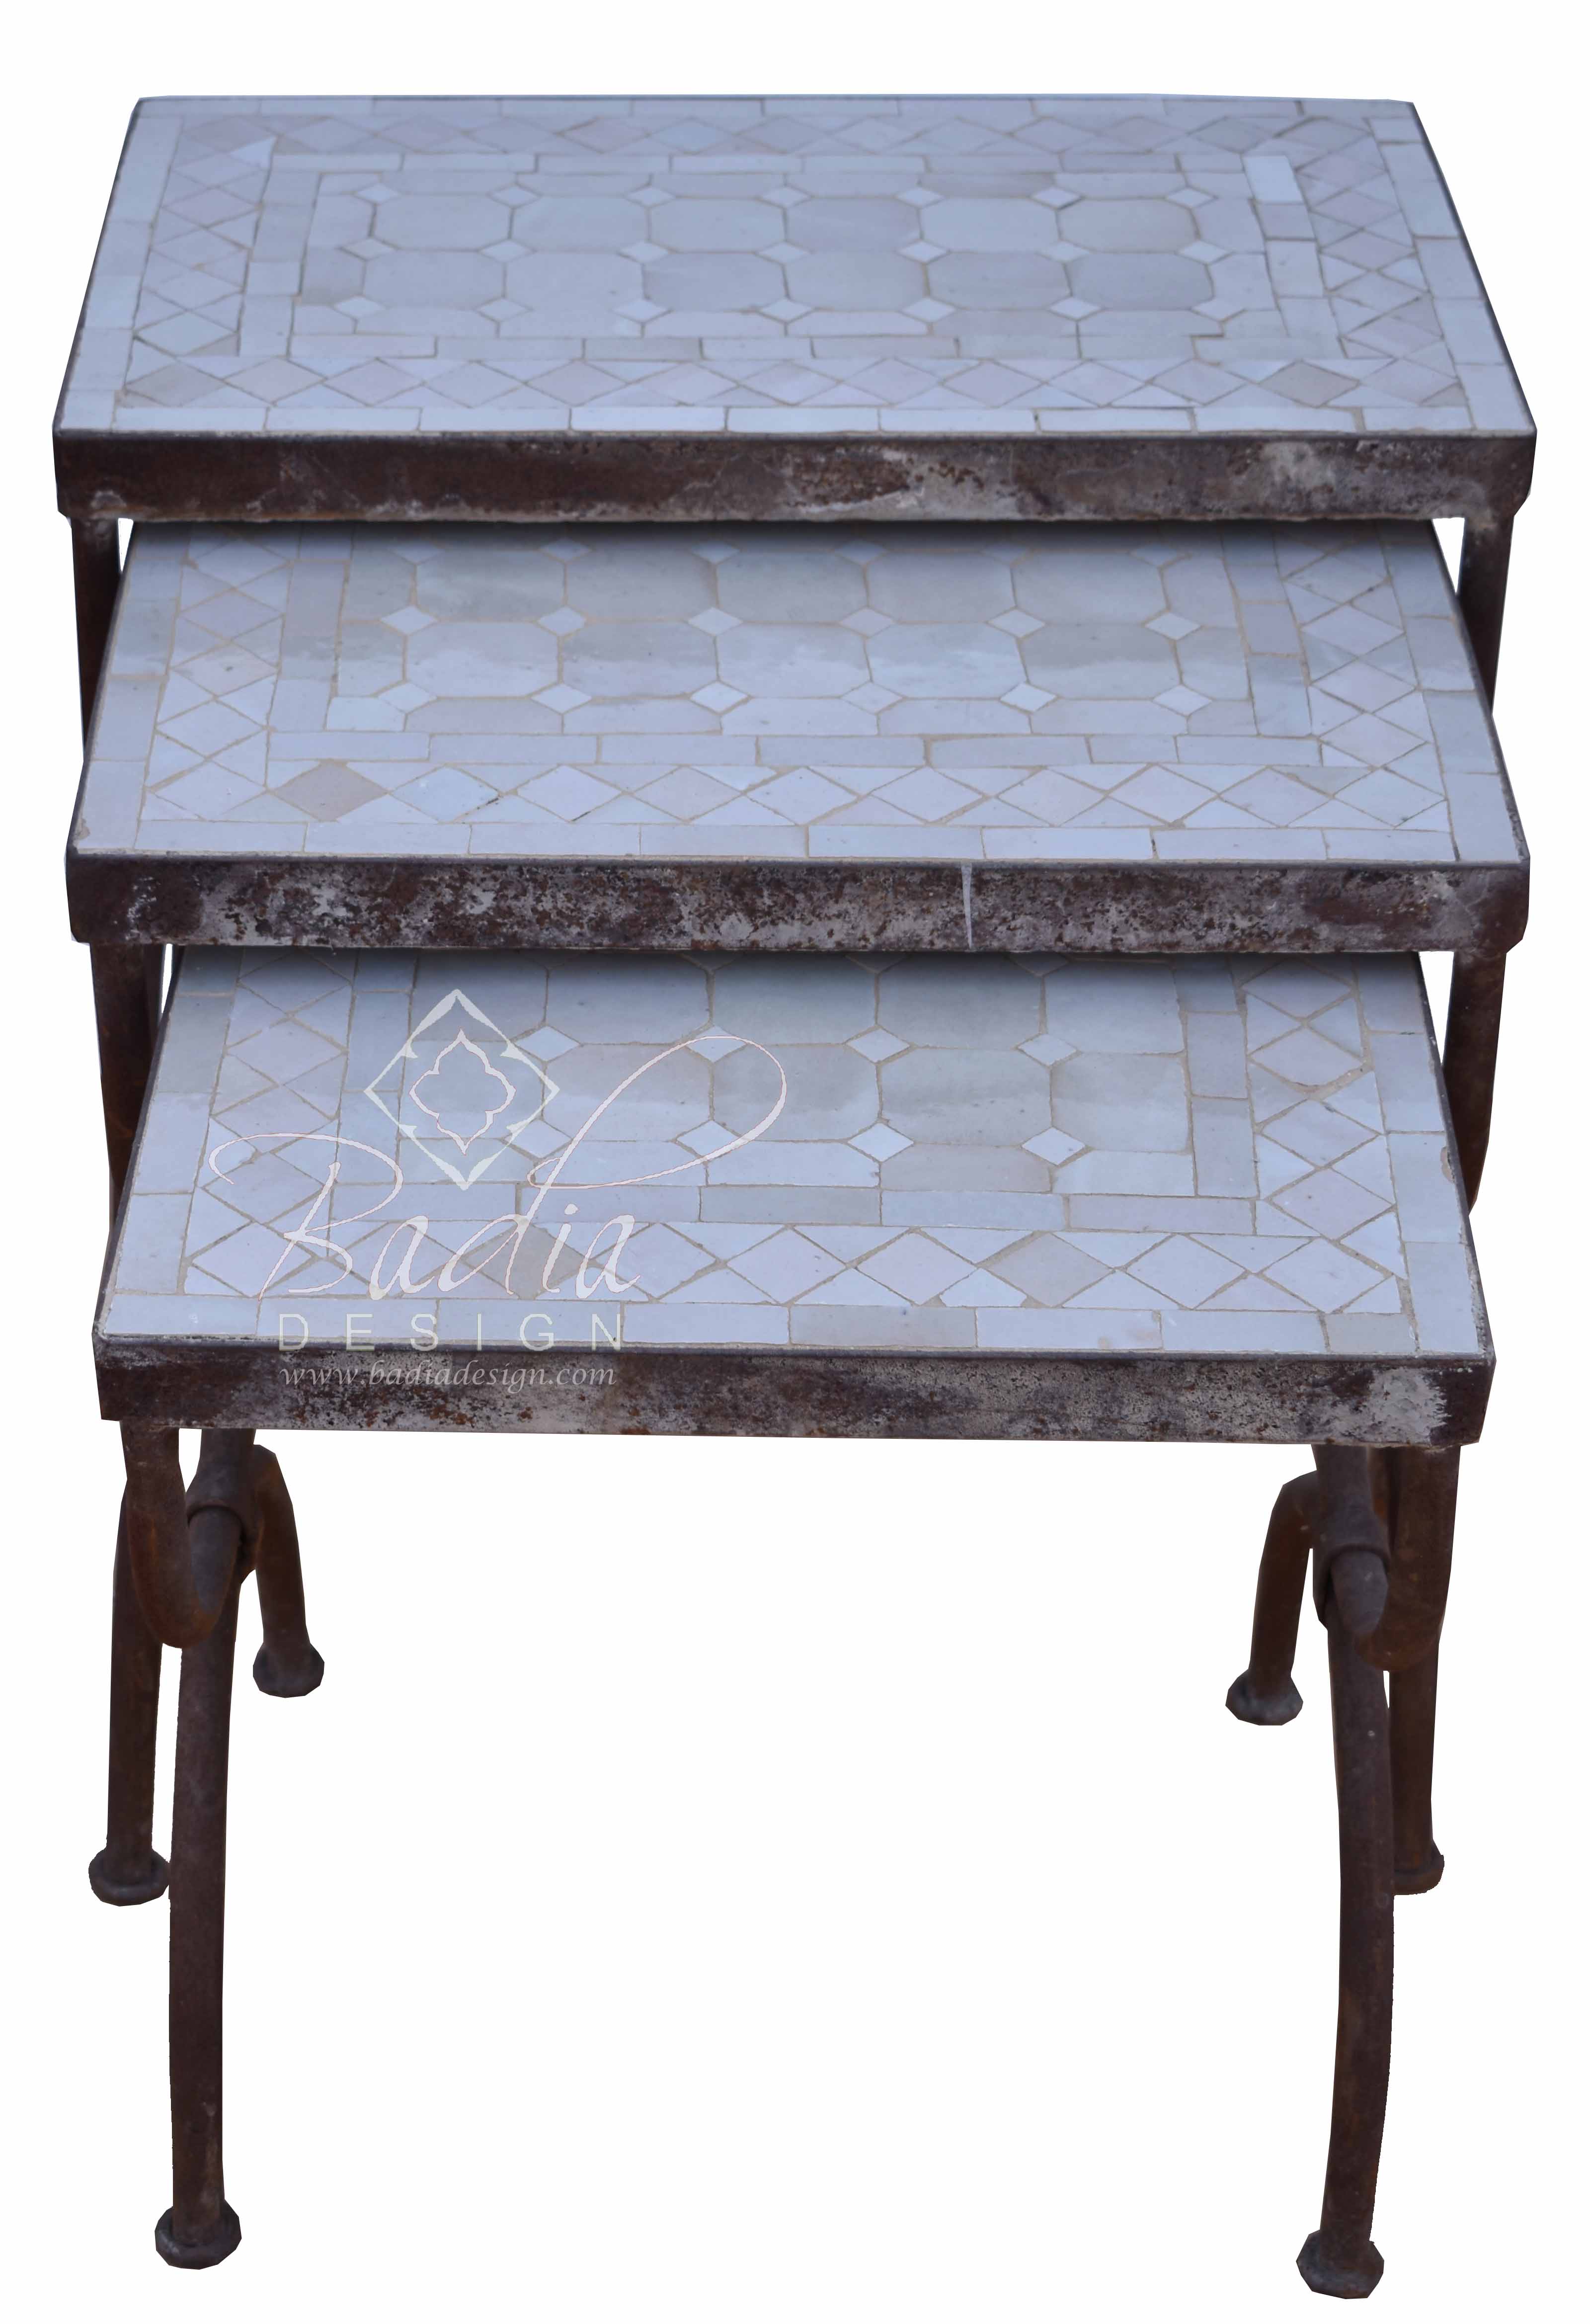 moroccan-off-white-nesting-tile-patio-tables-mt763.jpg